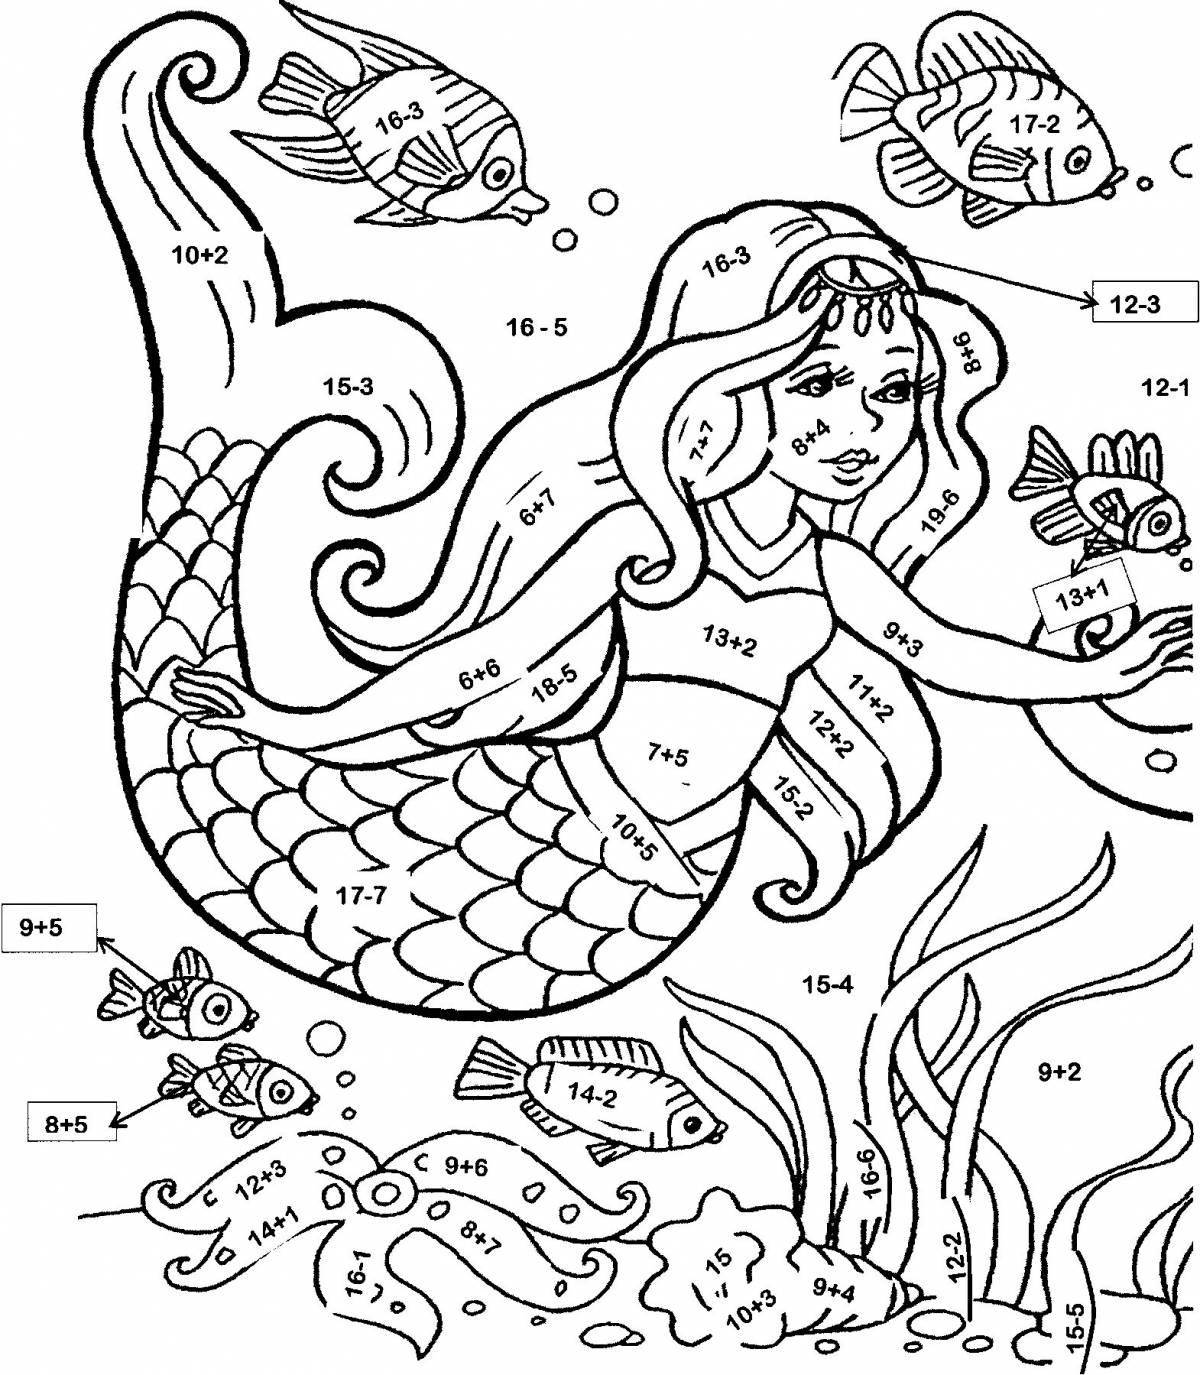 Fun coloring book with 20 examples